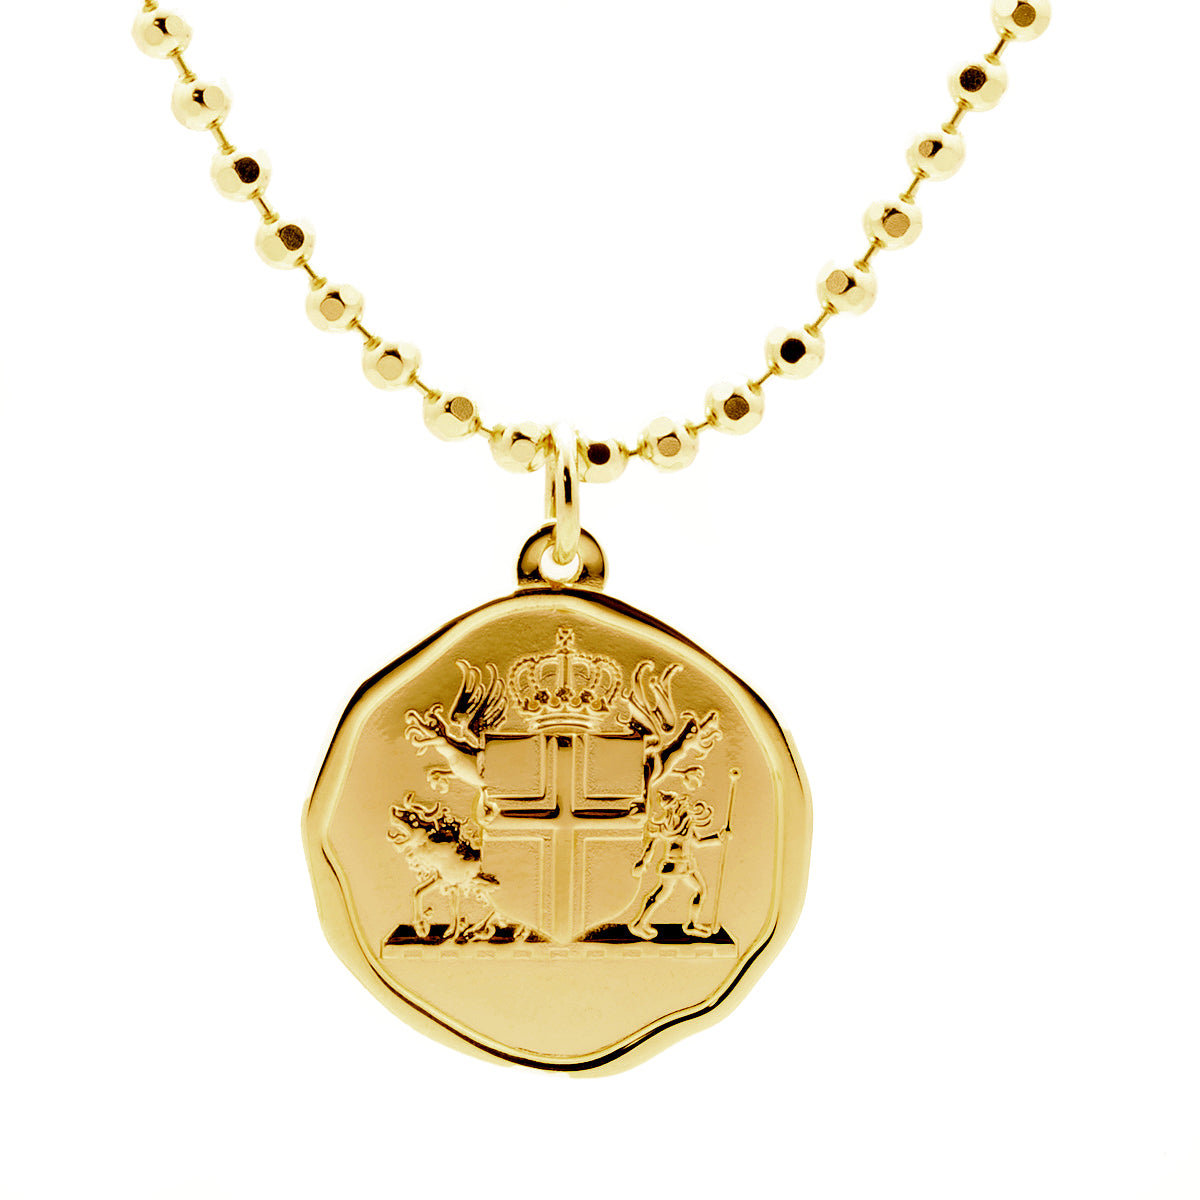 ICELAND COAT OF ARMS PENDANT GOLD